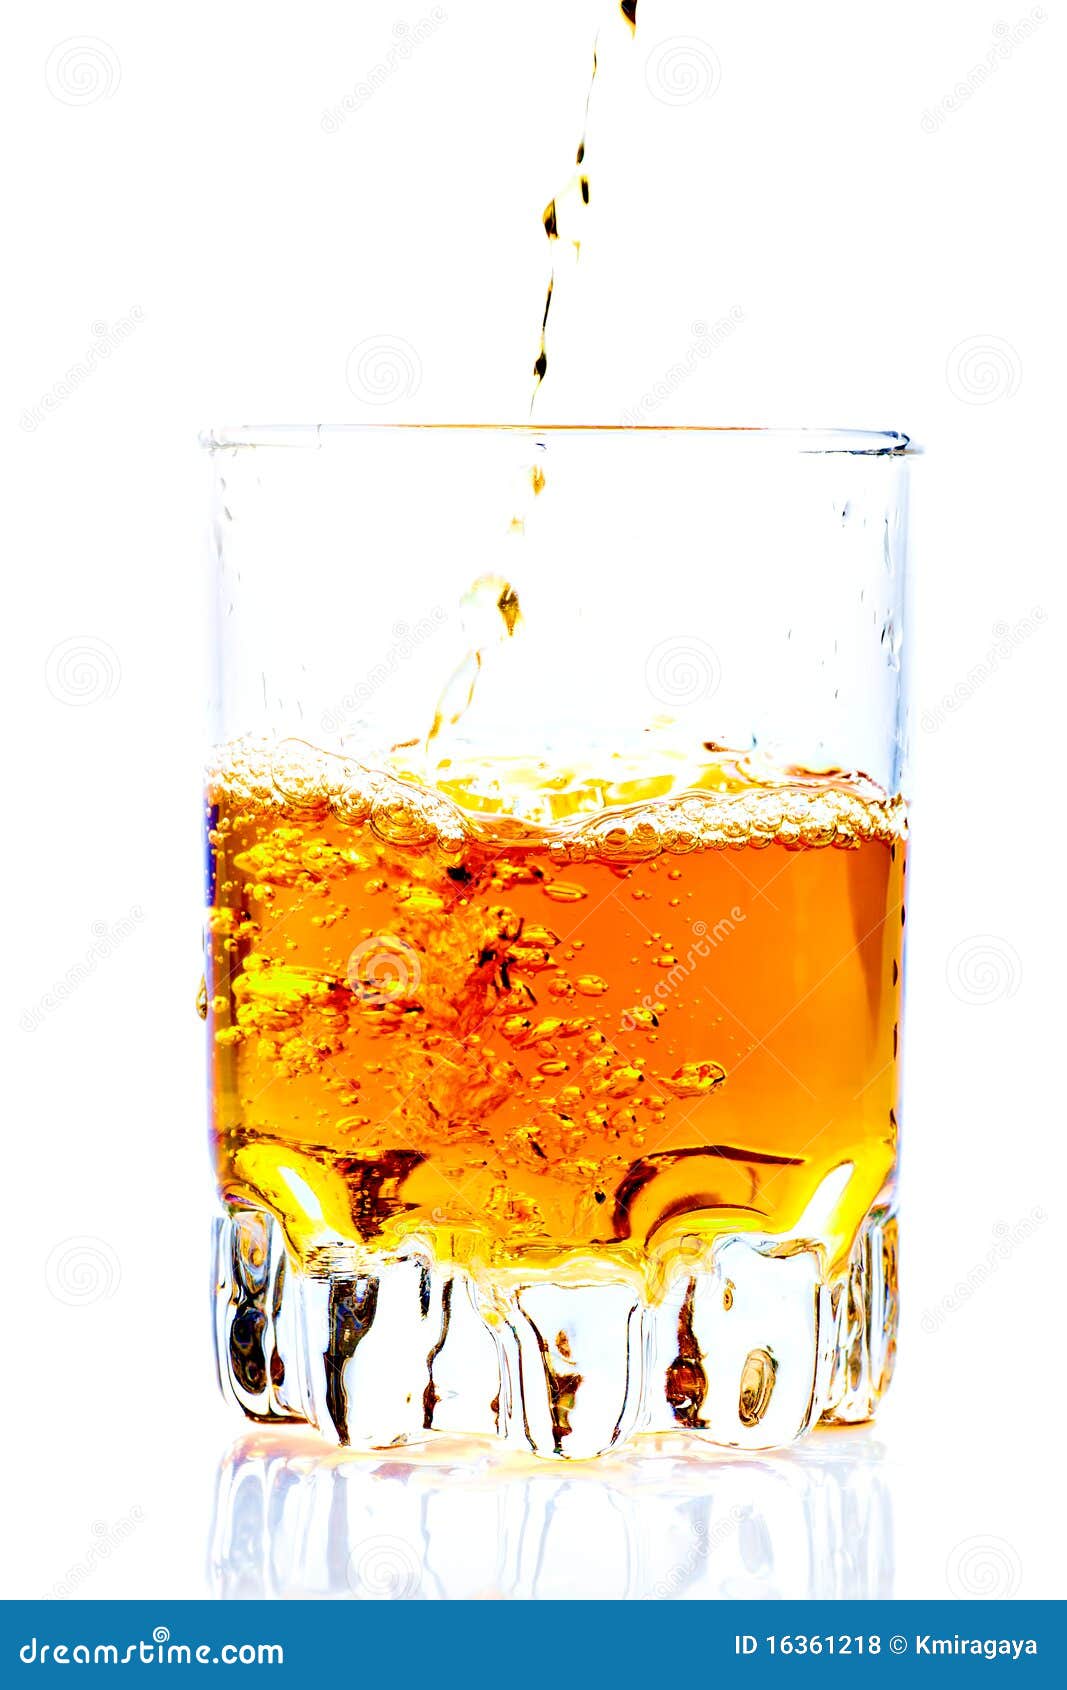 whisky,rum or any other golden liquor being poured